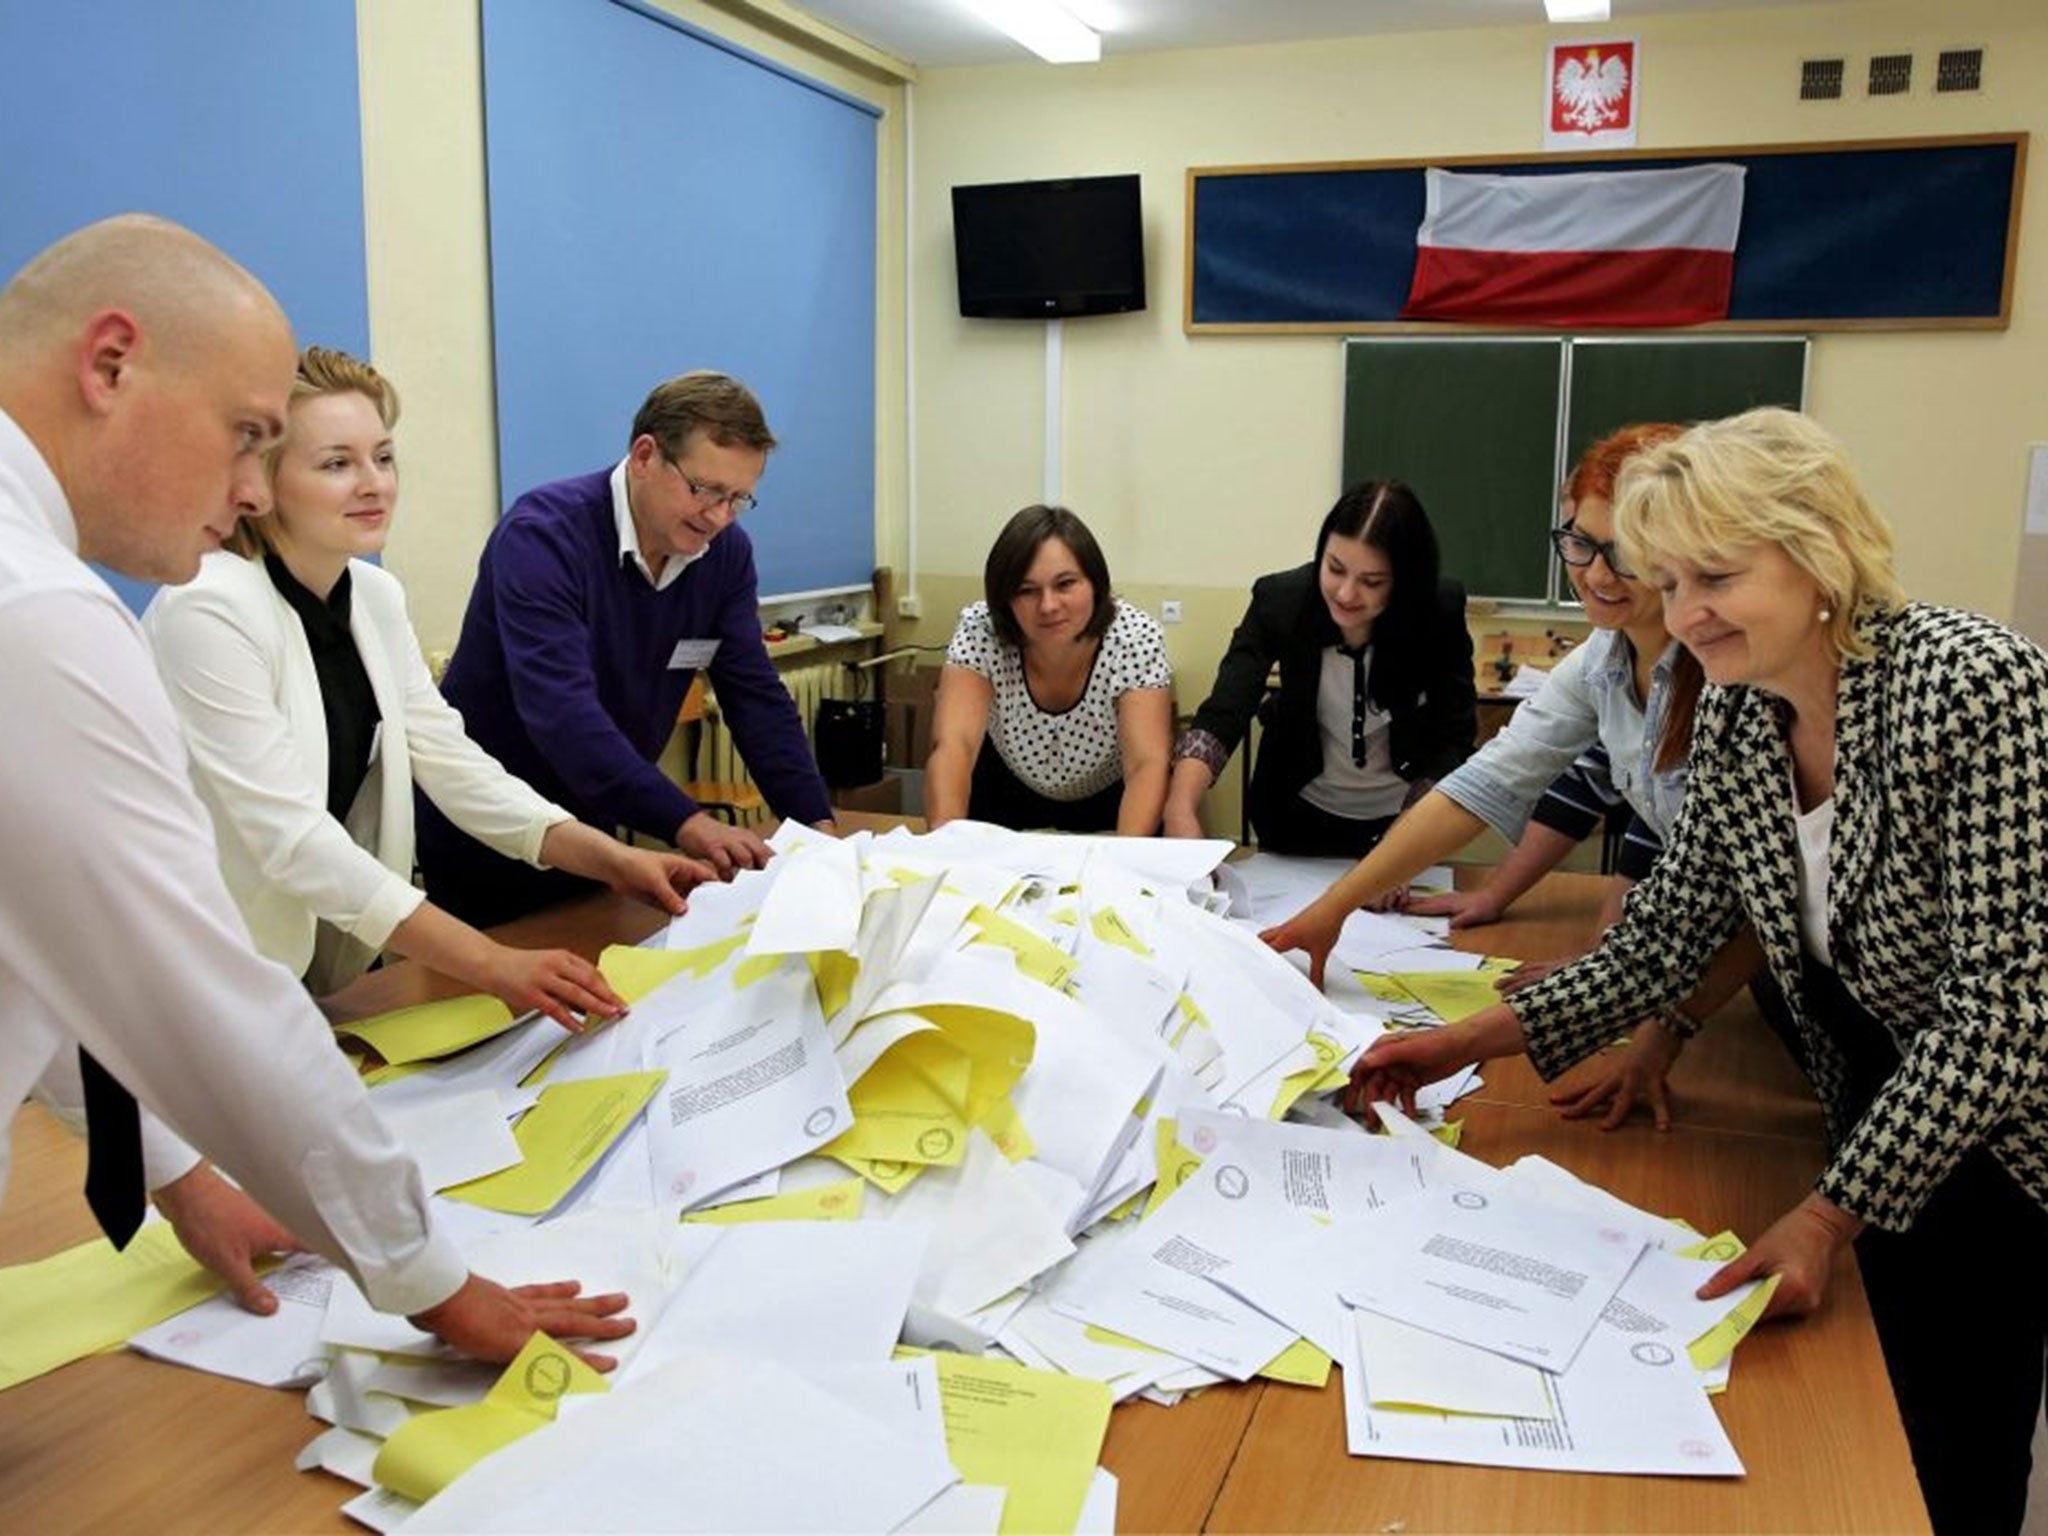 Polling officials count votes cast in Poland's parliamentary elections in one of the polling stations in Olsztyn